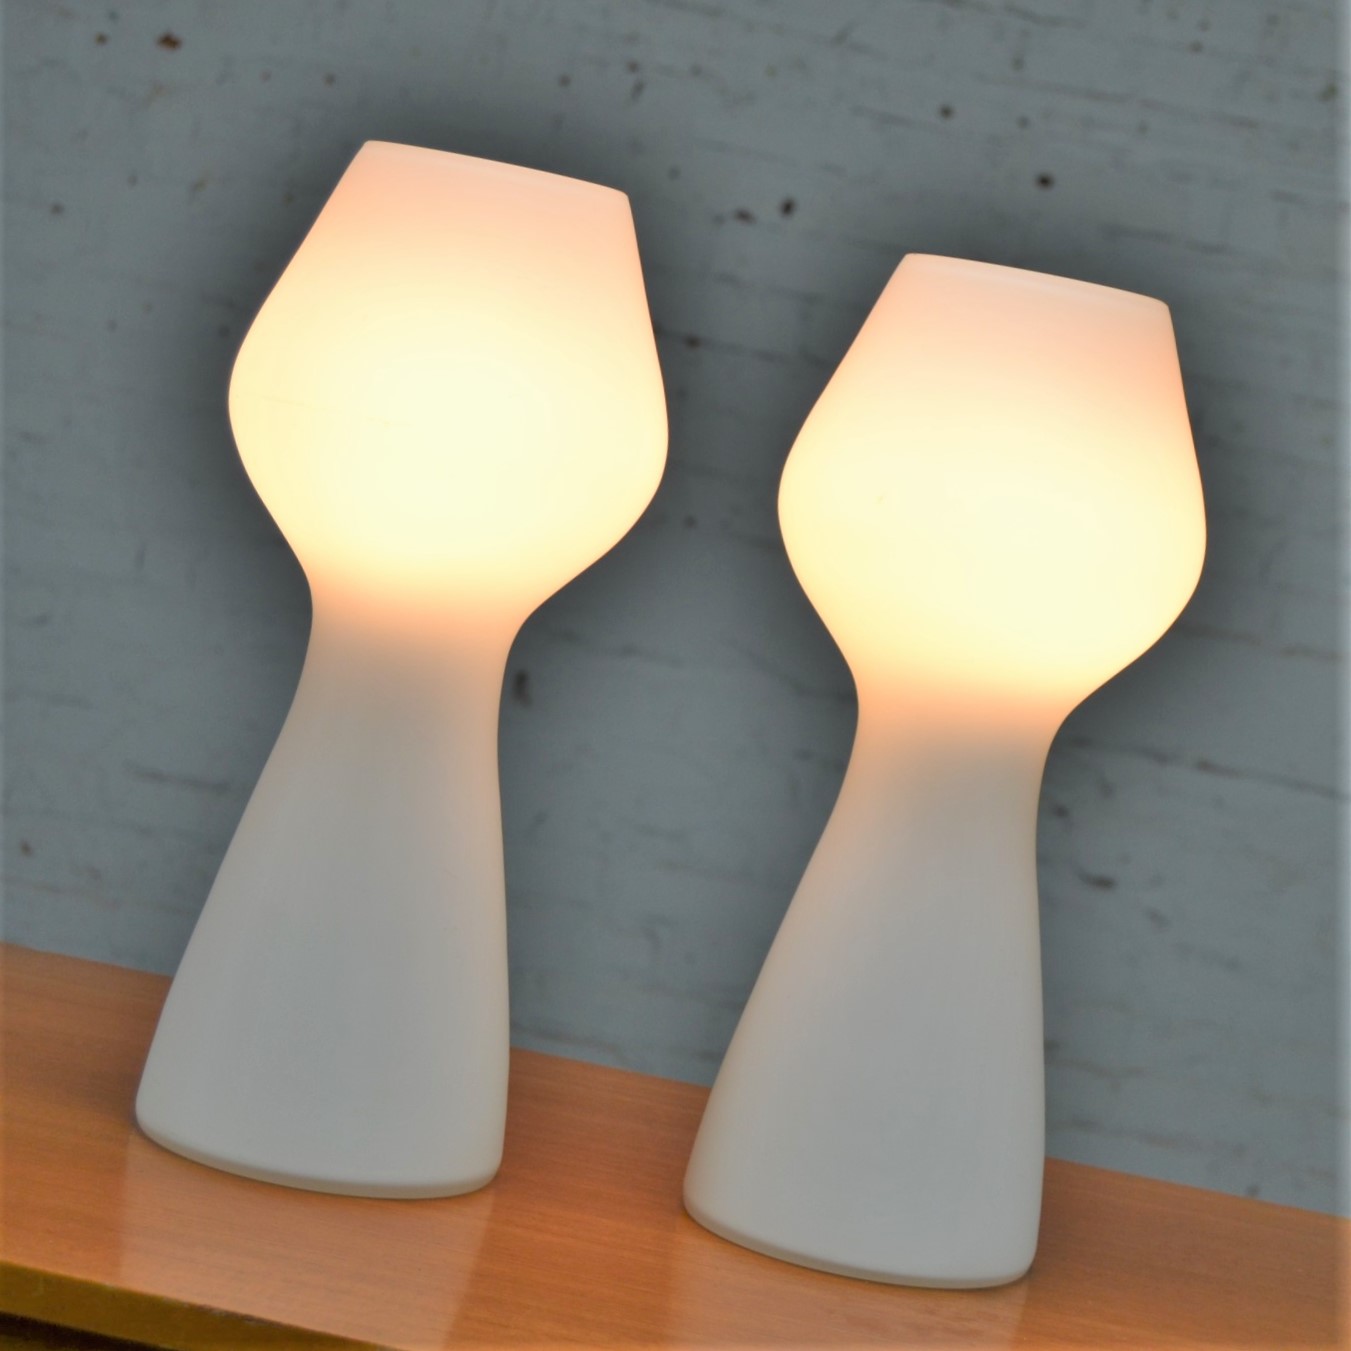 Opaque White Glass Bulbous Mushroom Lamps Style of Lisa Johansson-Pape for Orno Stockmann Vintage Mid Century Modern